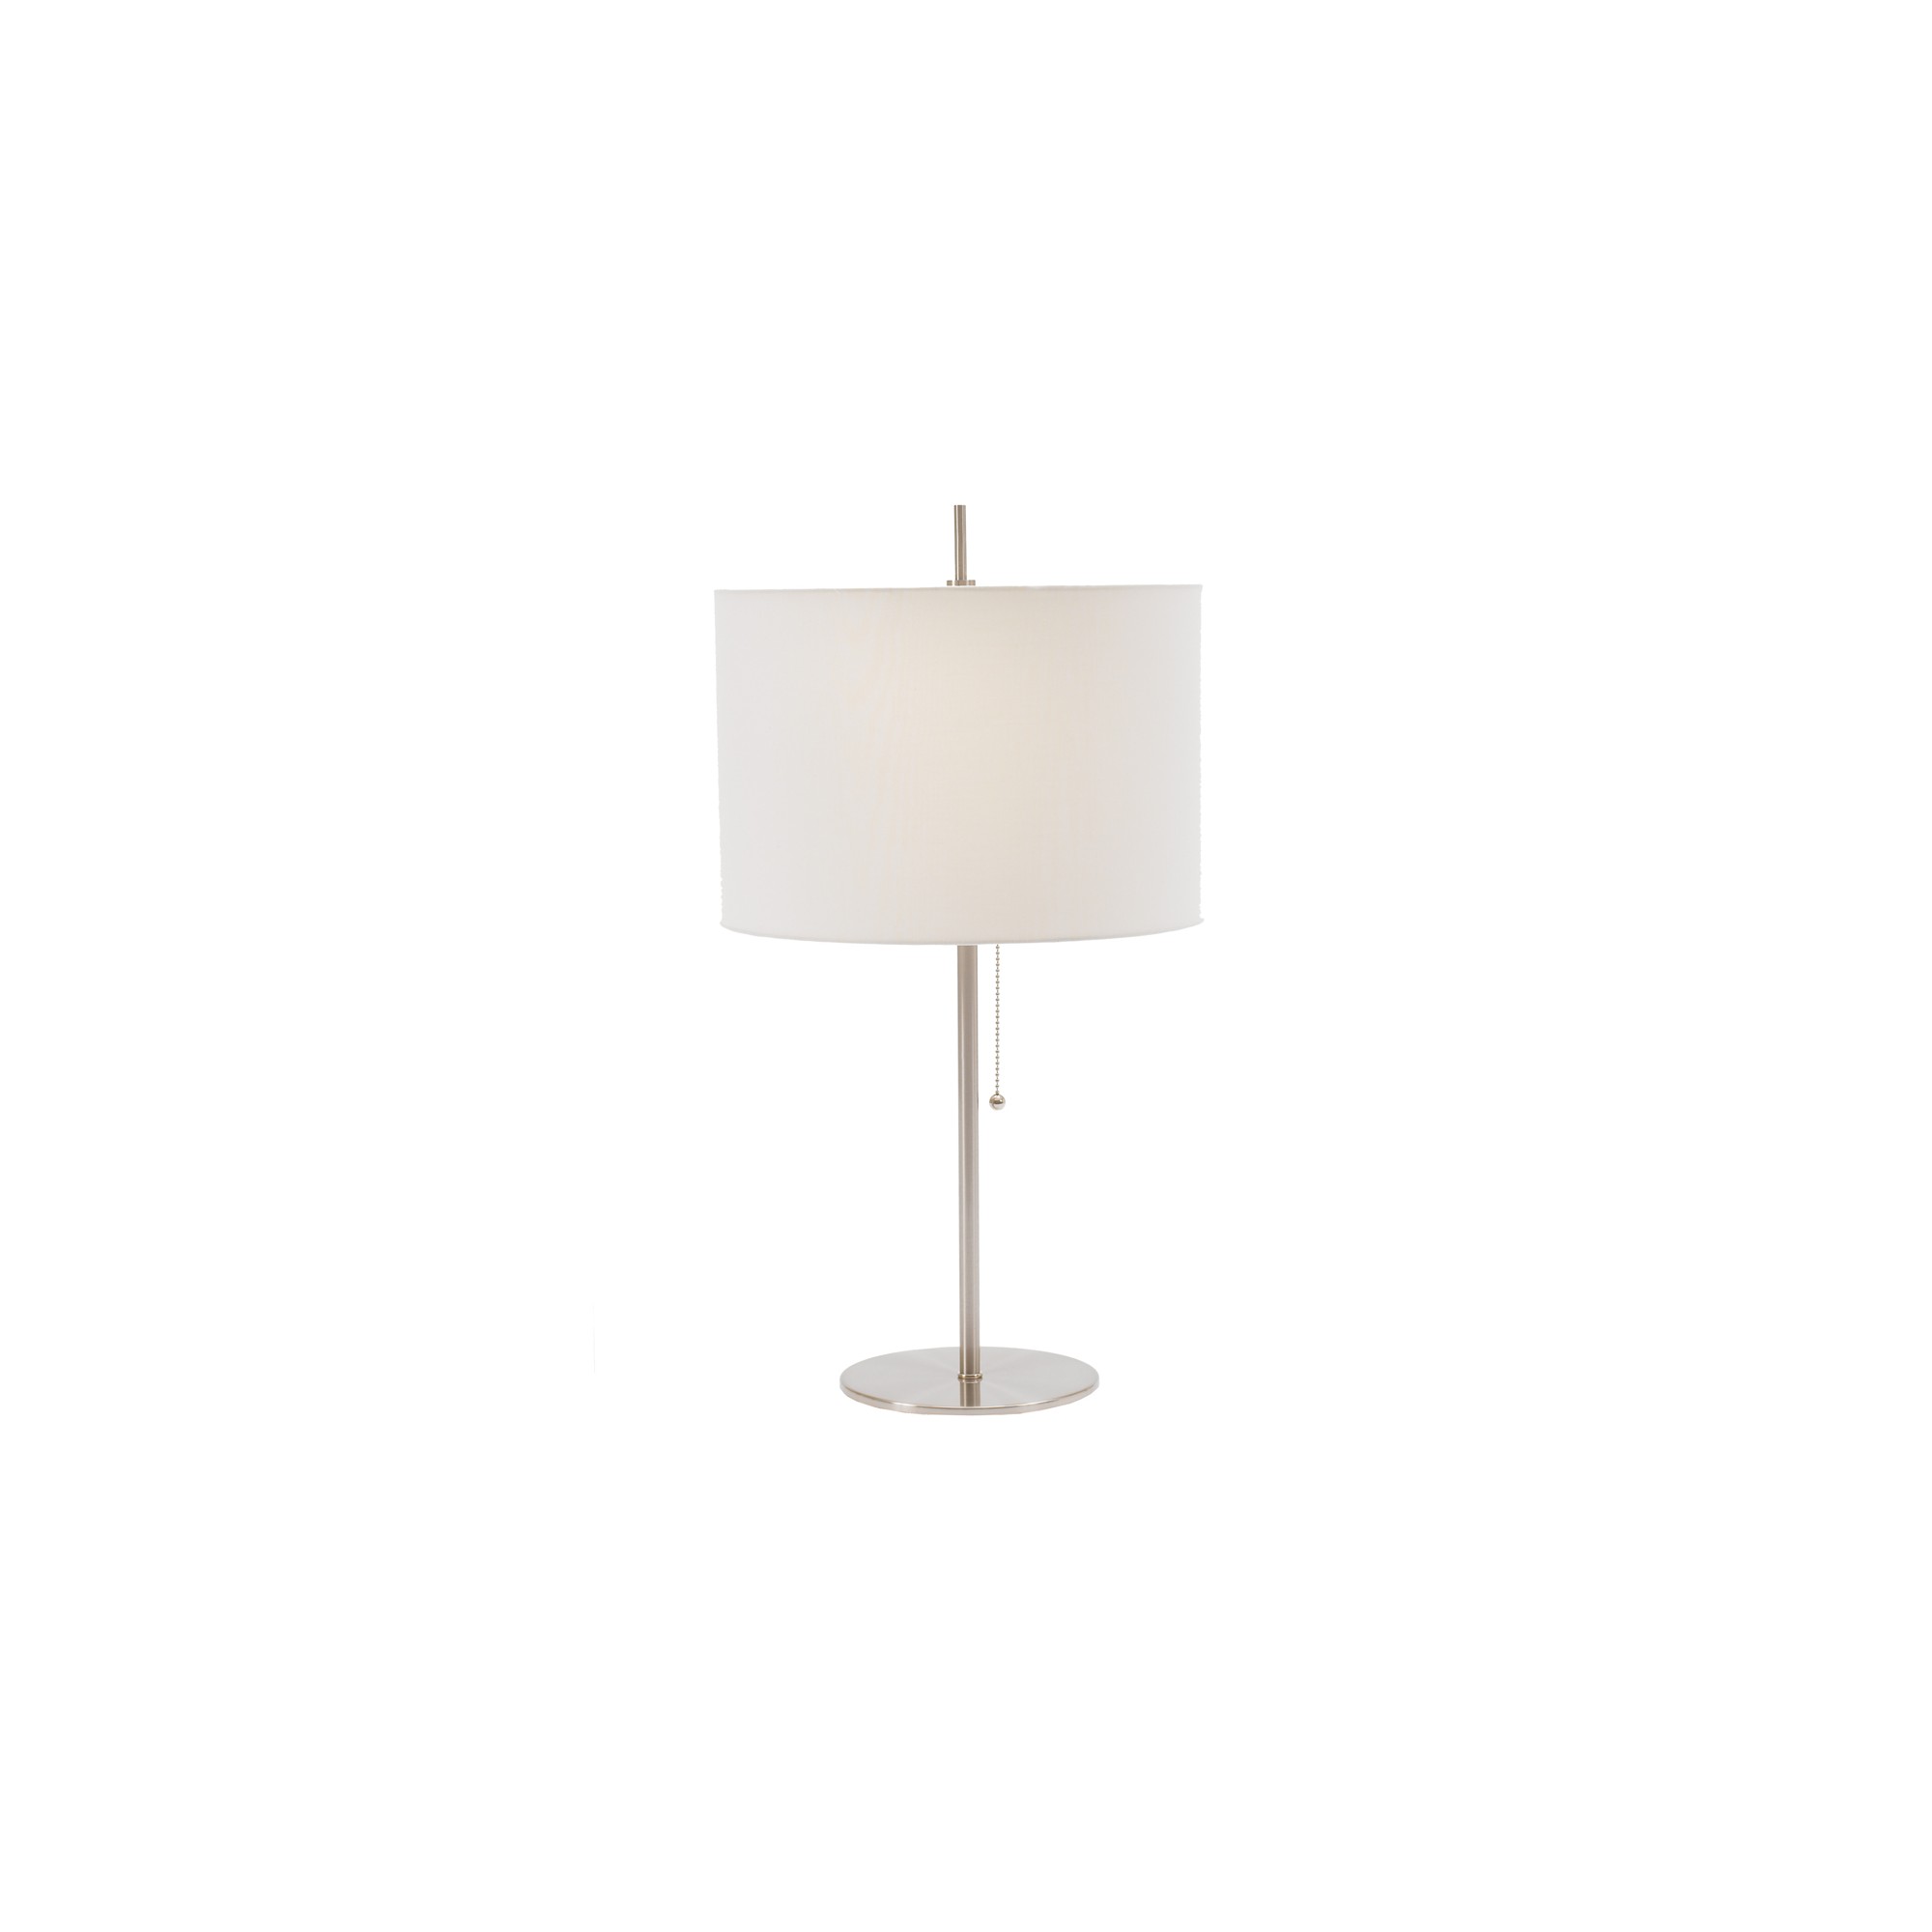 Simplistic Table Lamp - Brushed Steel (Lamp Only)